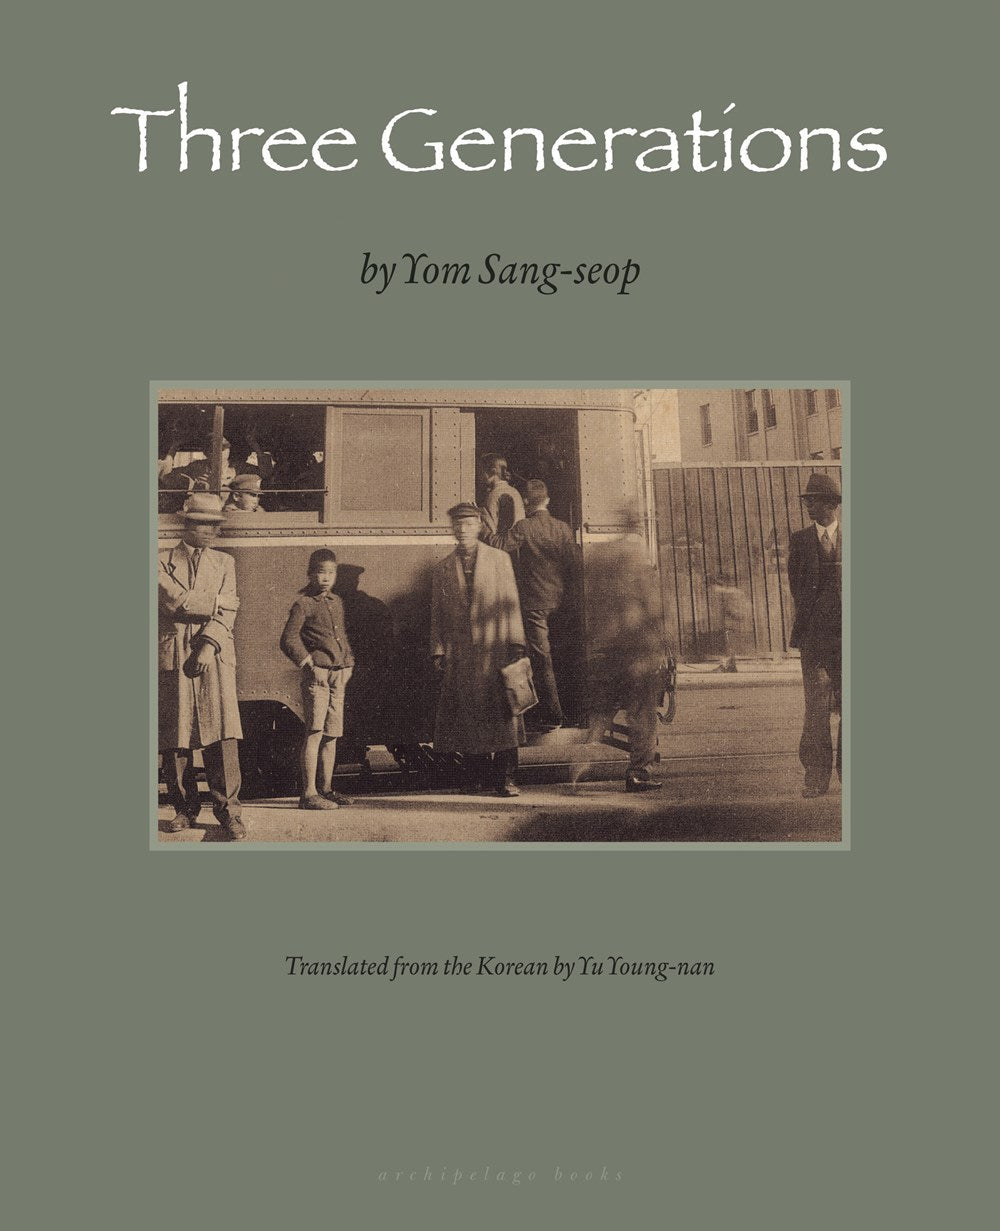 Three Generations by Tom Sang-seop (Translated from the Korean by Yu-Young-nan)